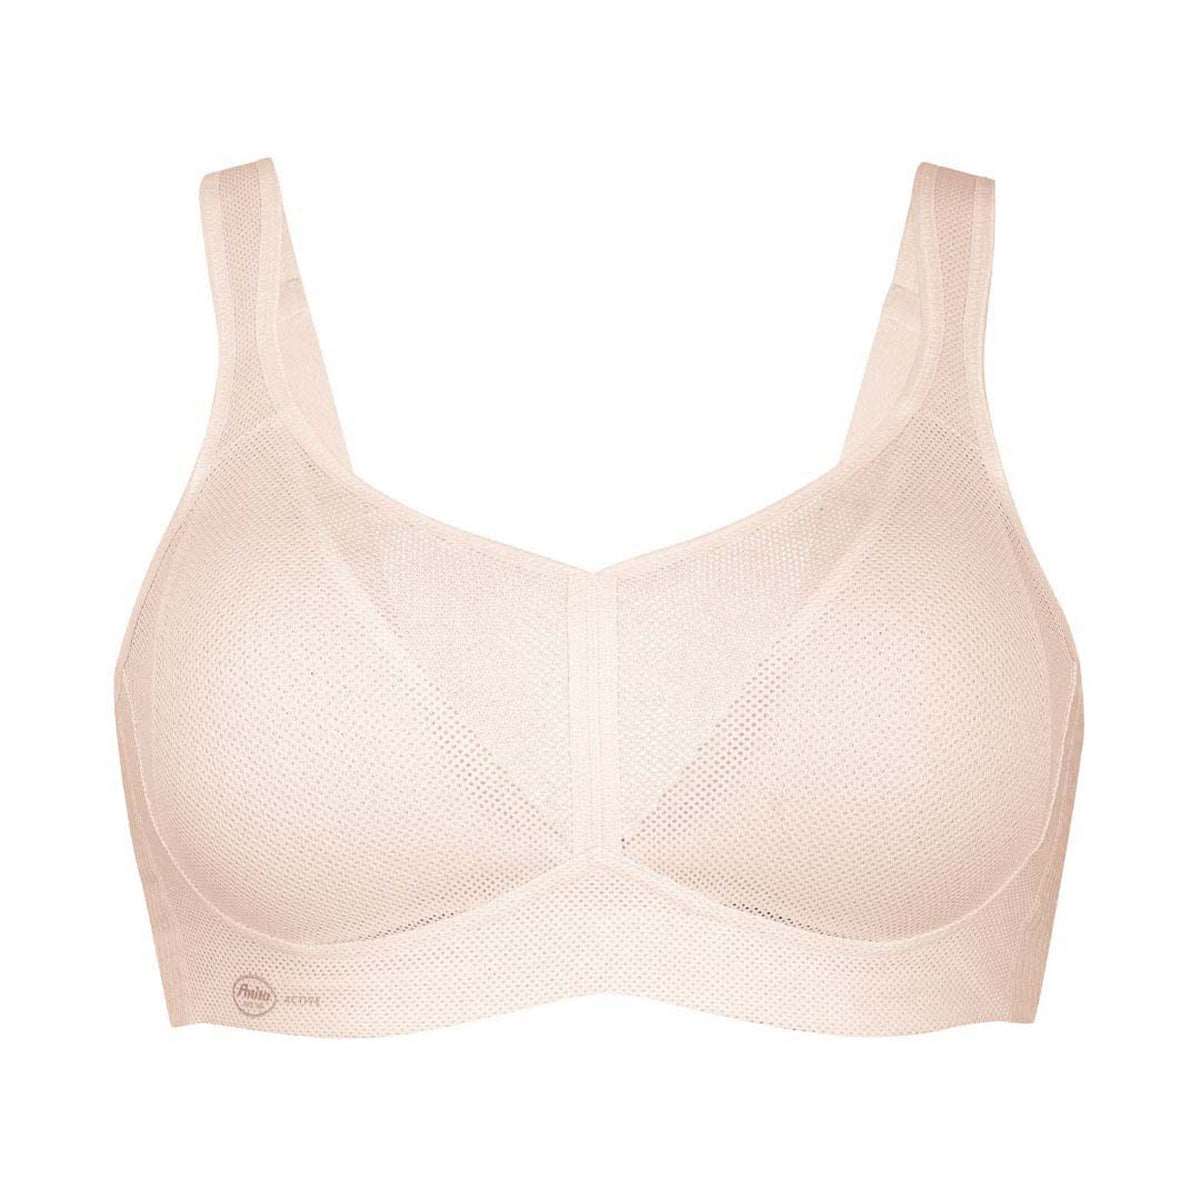 Anita Light & Firm Sports Bra 006 WHITE buy for the best price CAD